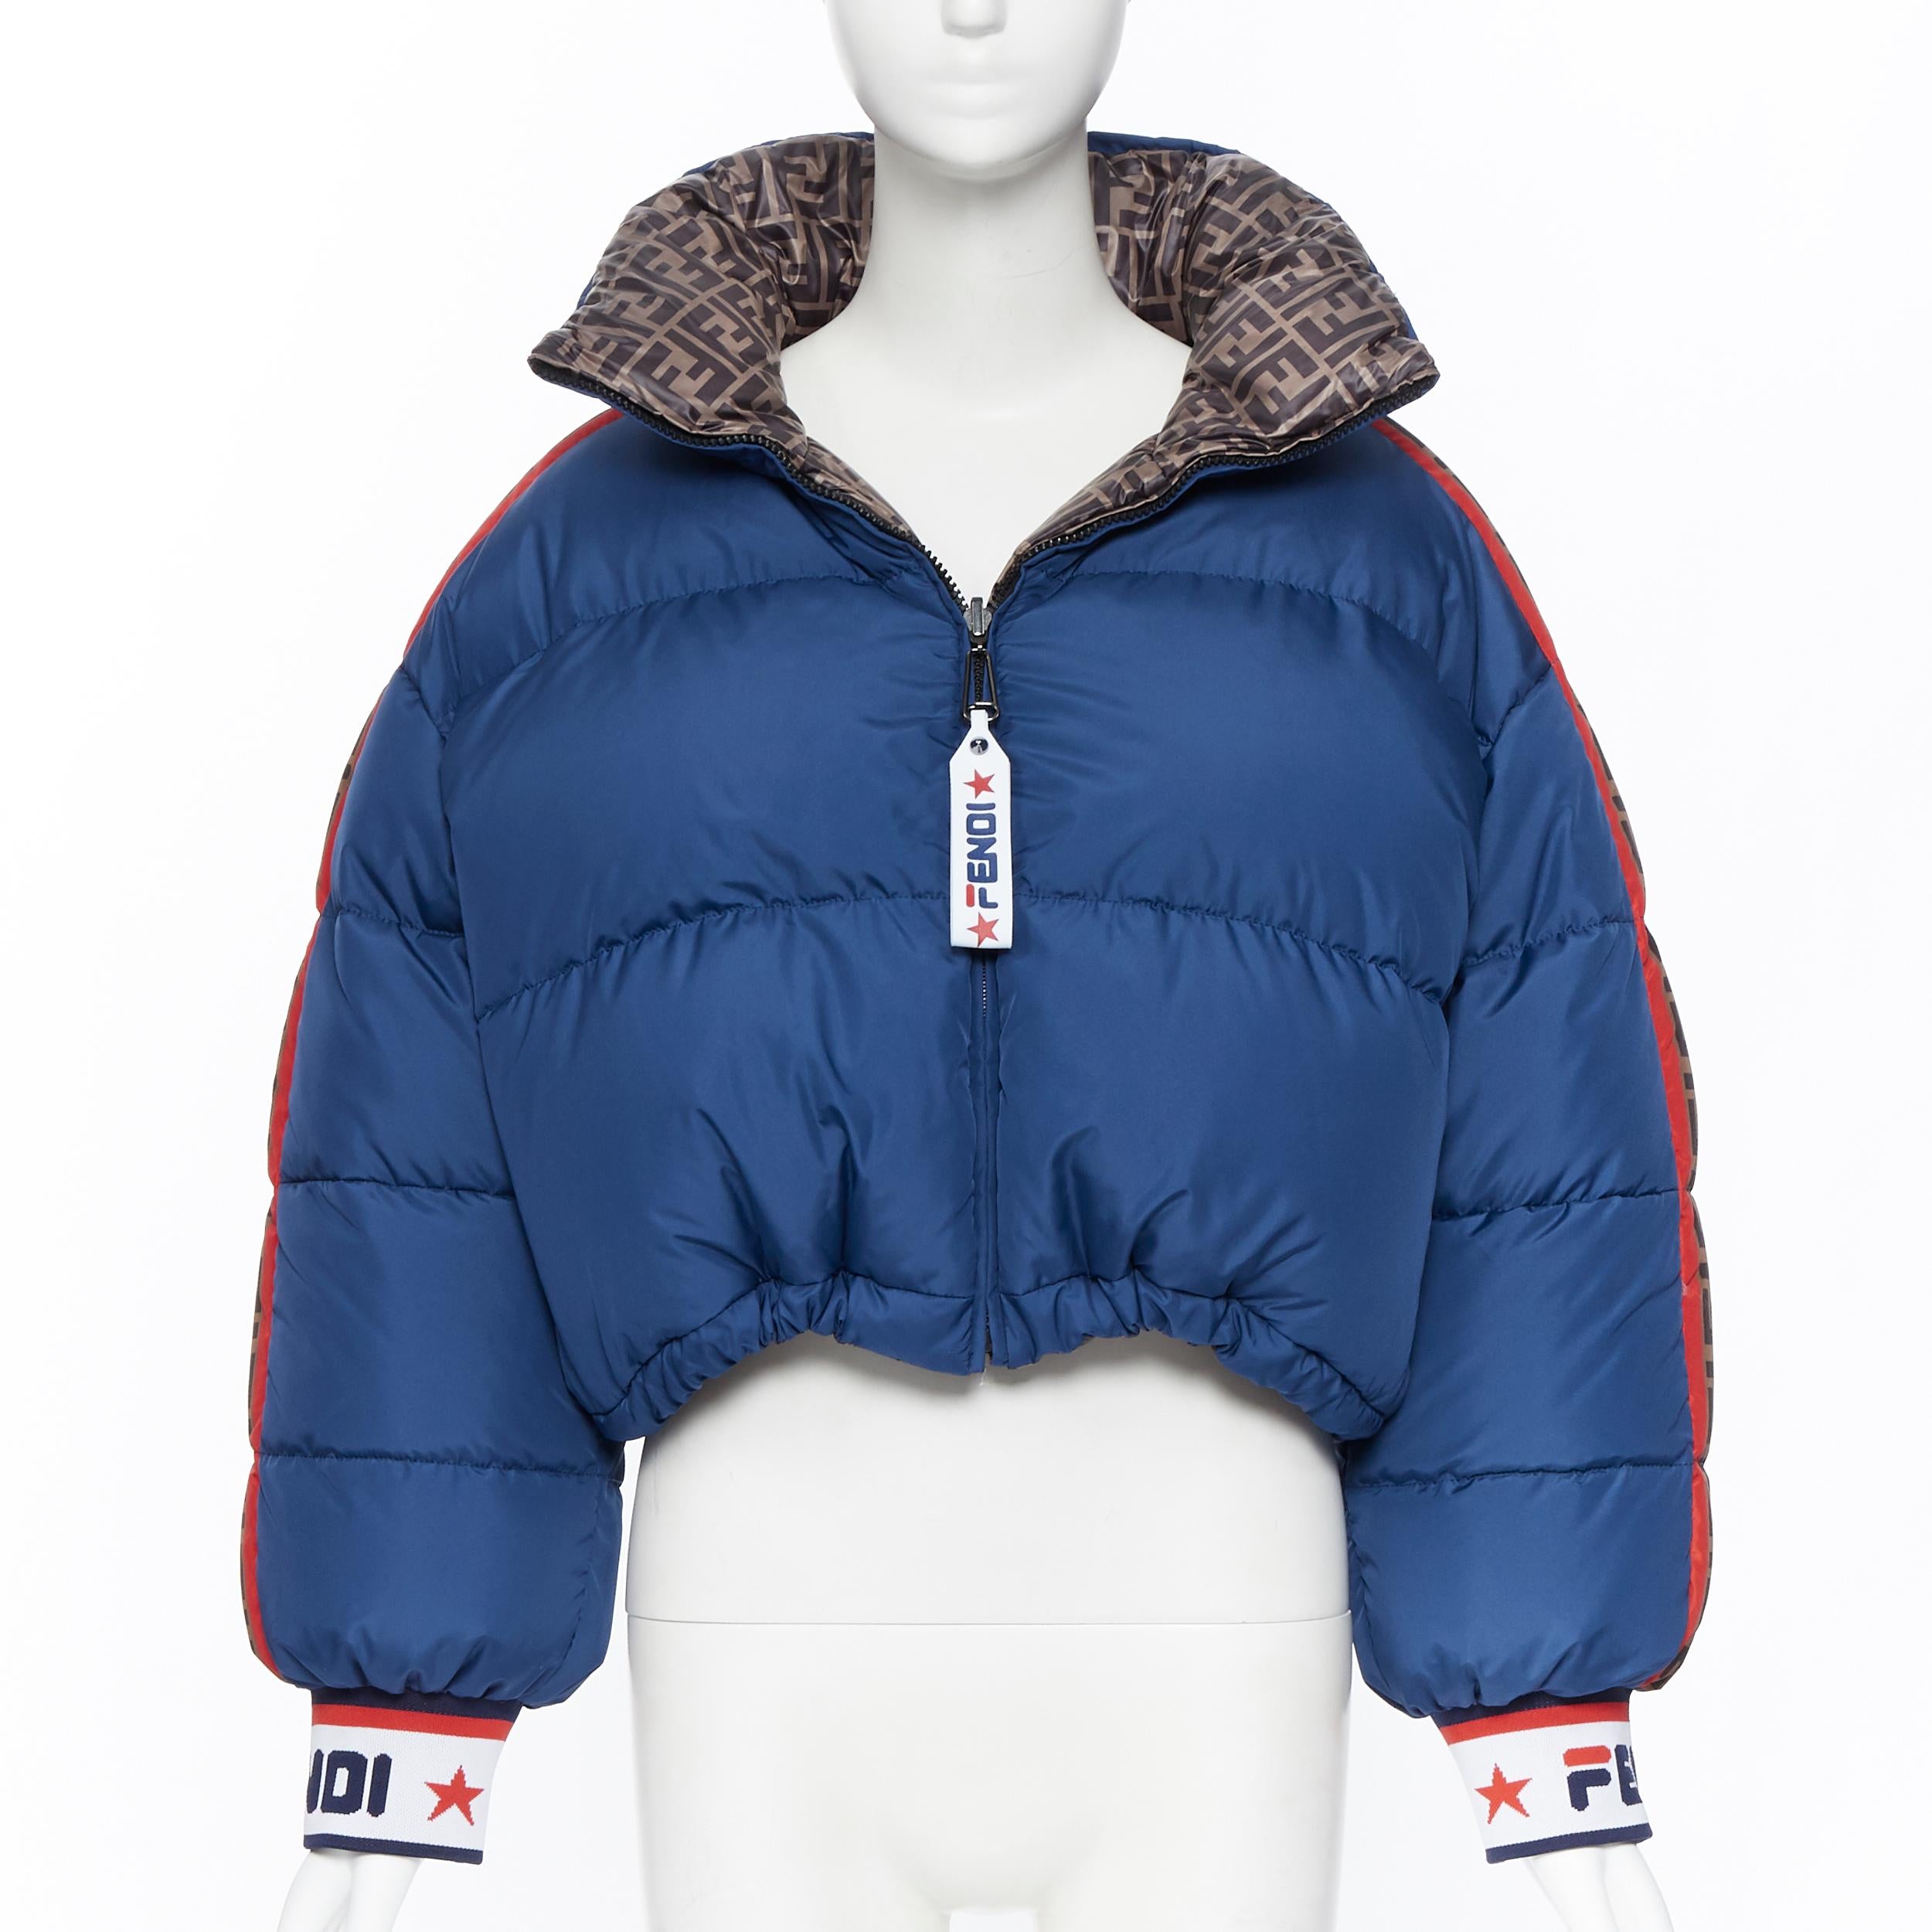 new FENDI Fila Mania Zucca monogram blue goose down cropped puffer jacket S
Brand: Fendi
Collection: Fila Collaboration
Model Name / Style: Goose bomber
Material: Nylon
Color: Blue
Pattern: Solid
Closure: Zip
Extra Detail: From the Fila Mania X